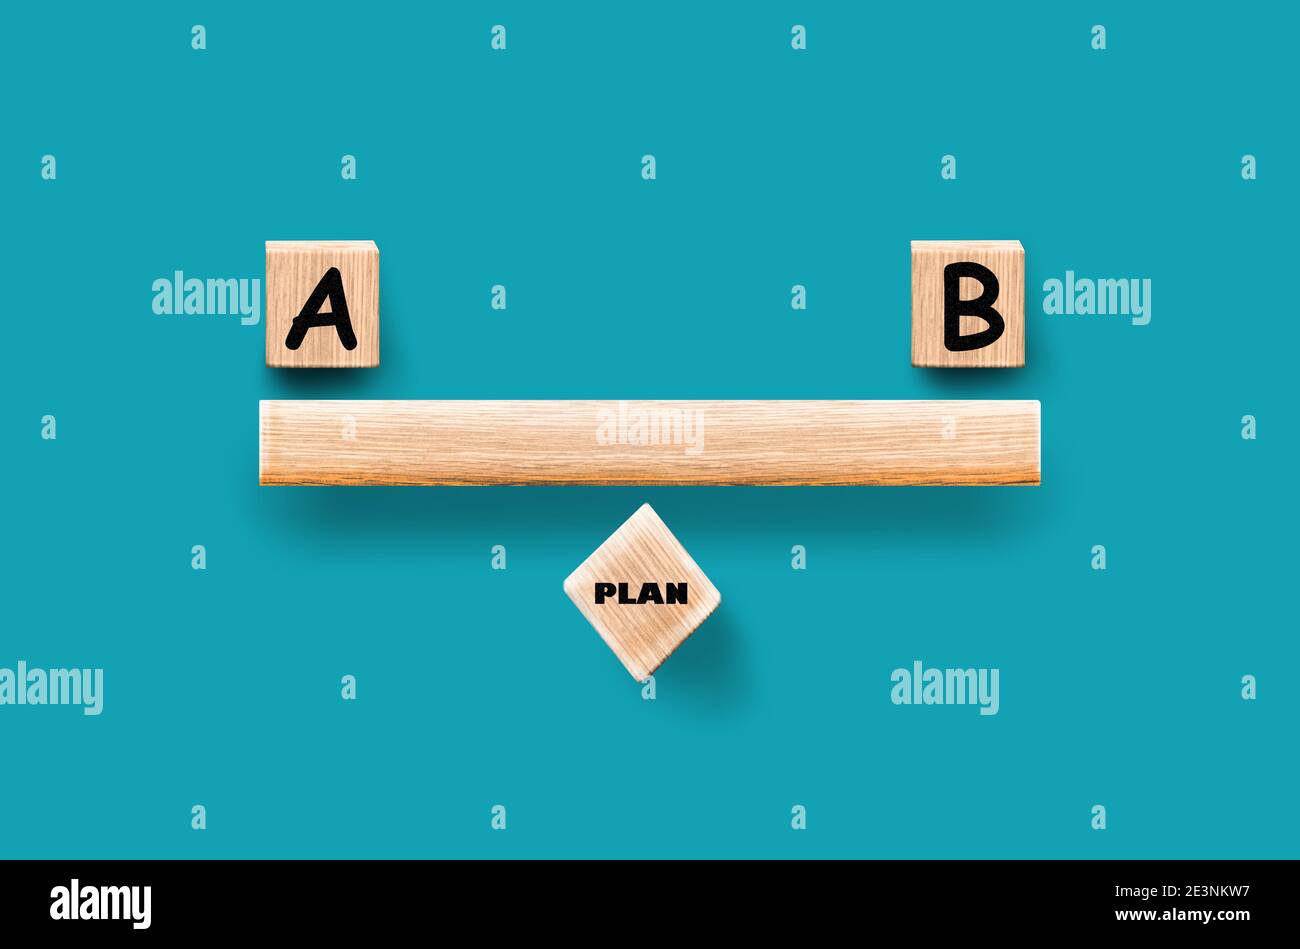 Plan A or Plan B in wooden blocks, Front View, Turquoise background. Choices Balance Concept. Stock Photo